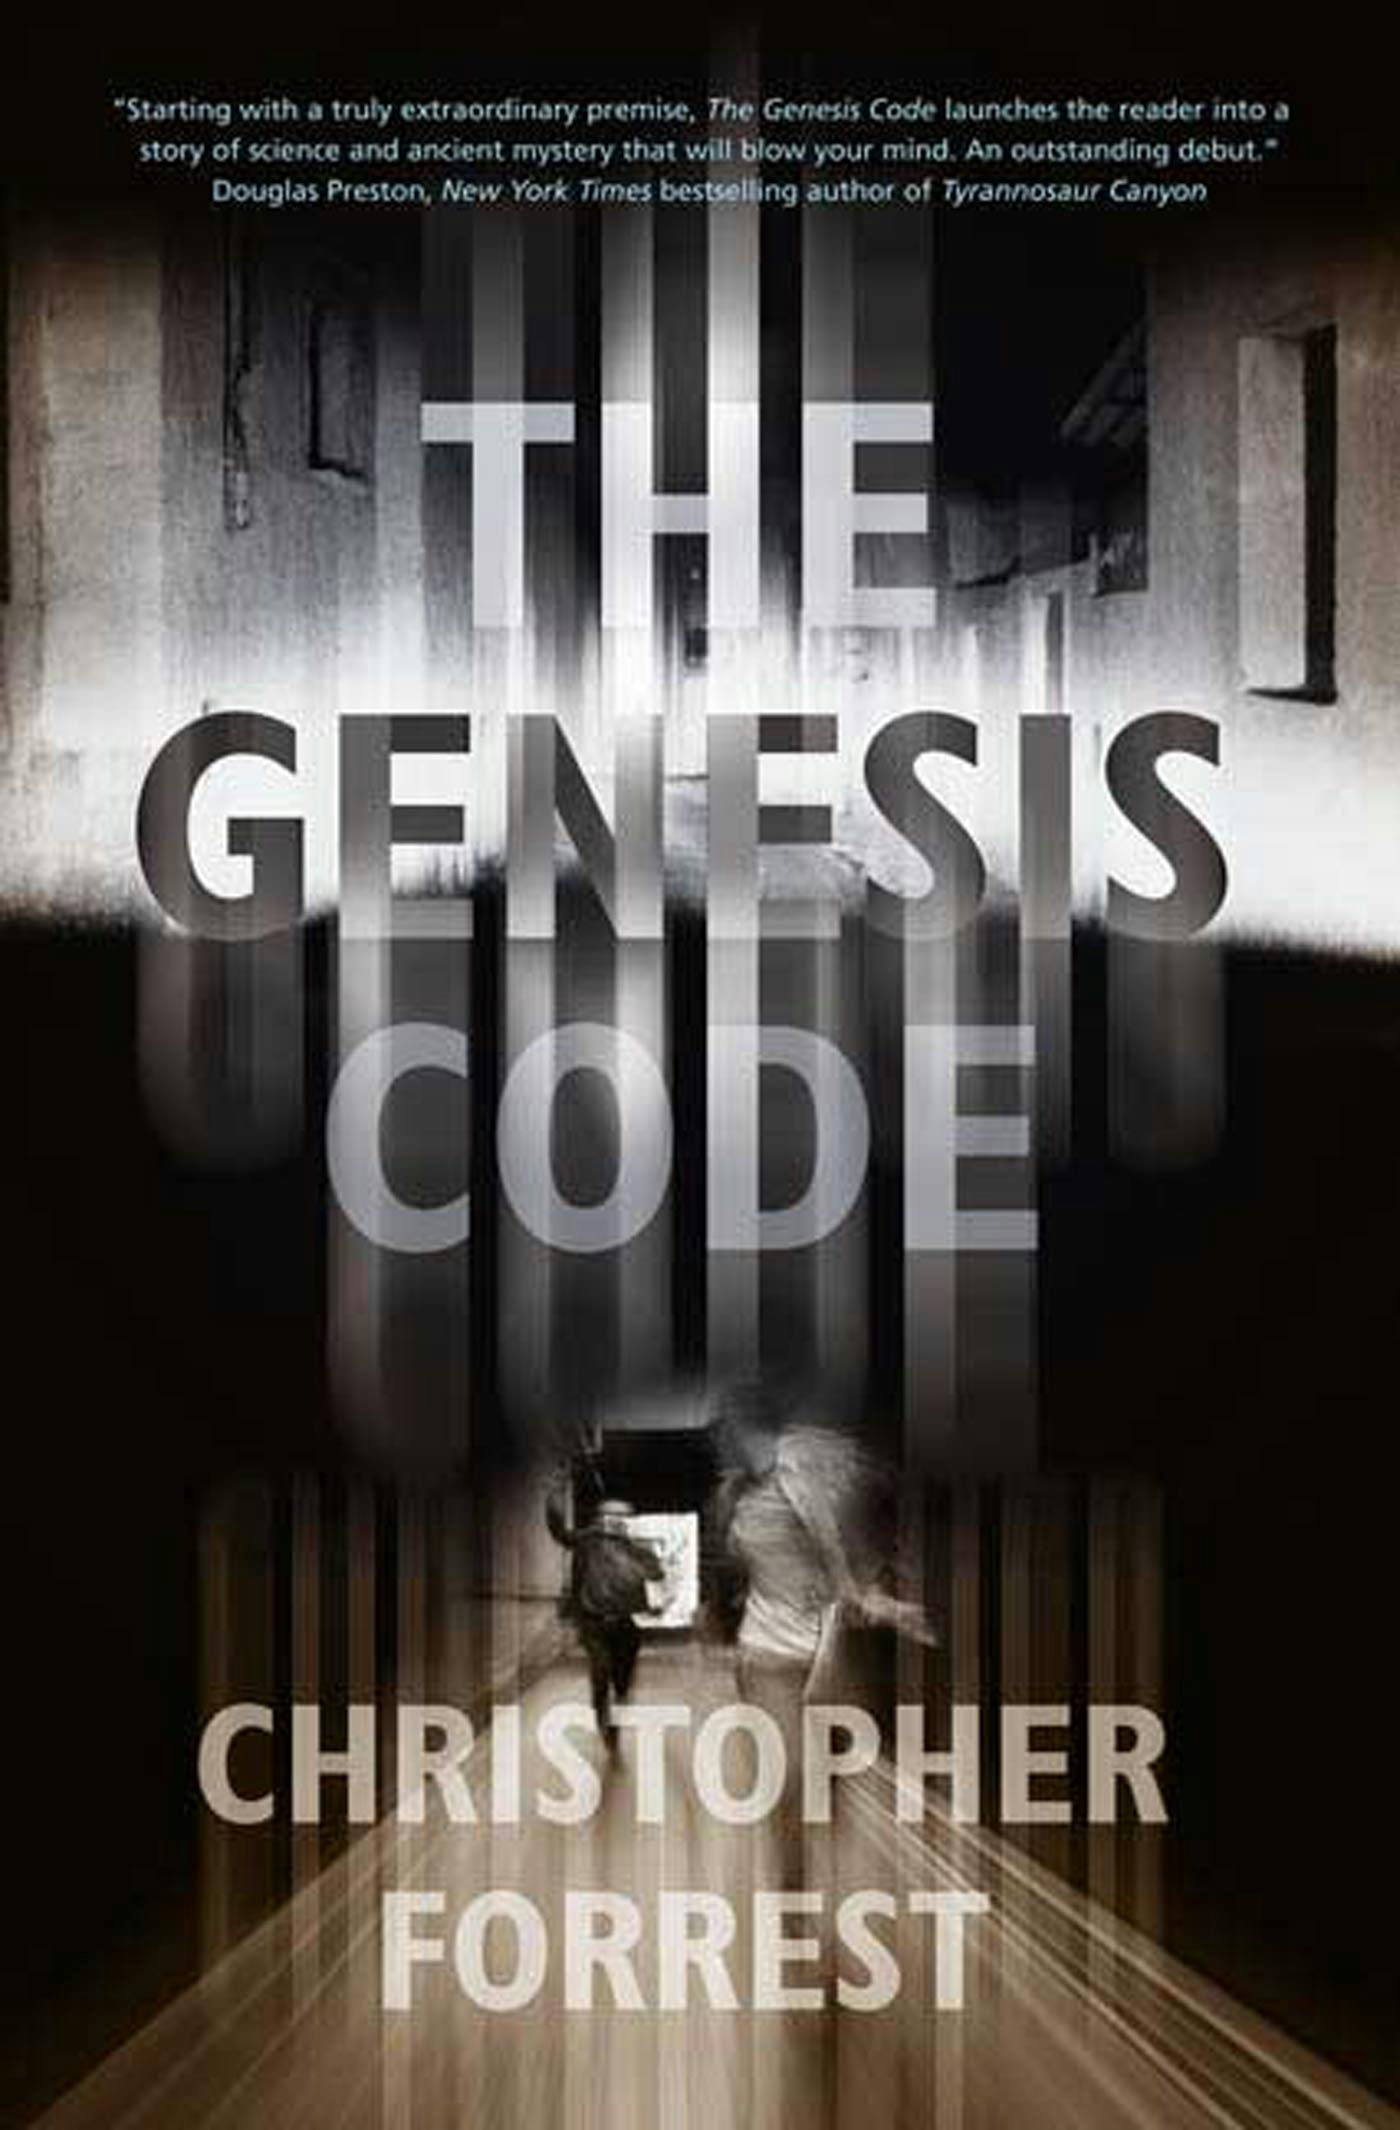 Cover for the book titled as: The Genesis Code